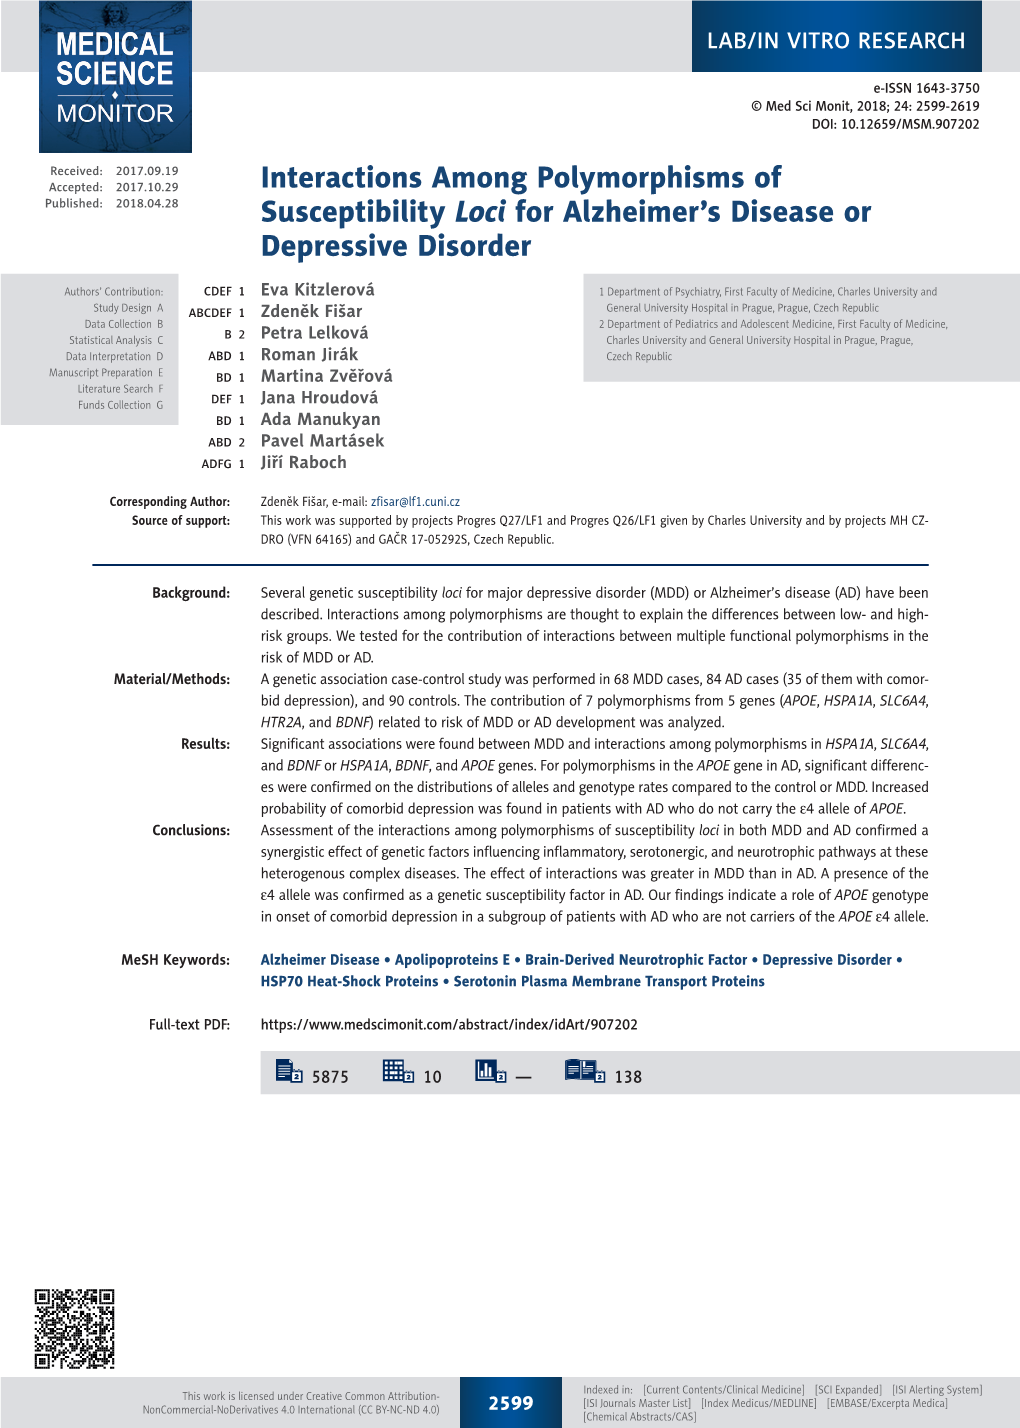 Interactions Among Polymorphisms of Susceptibility Loci for Alzheimer's